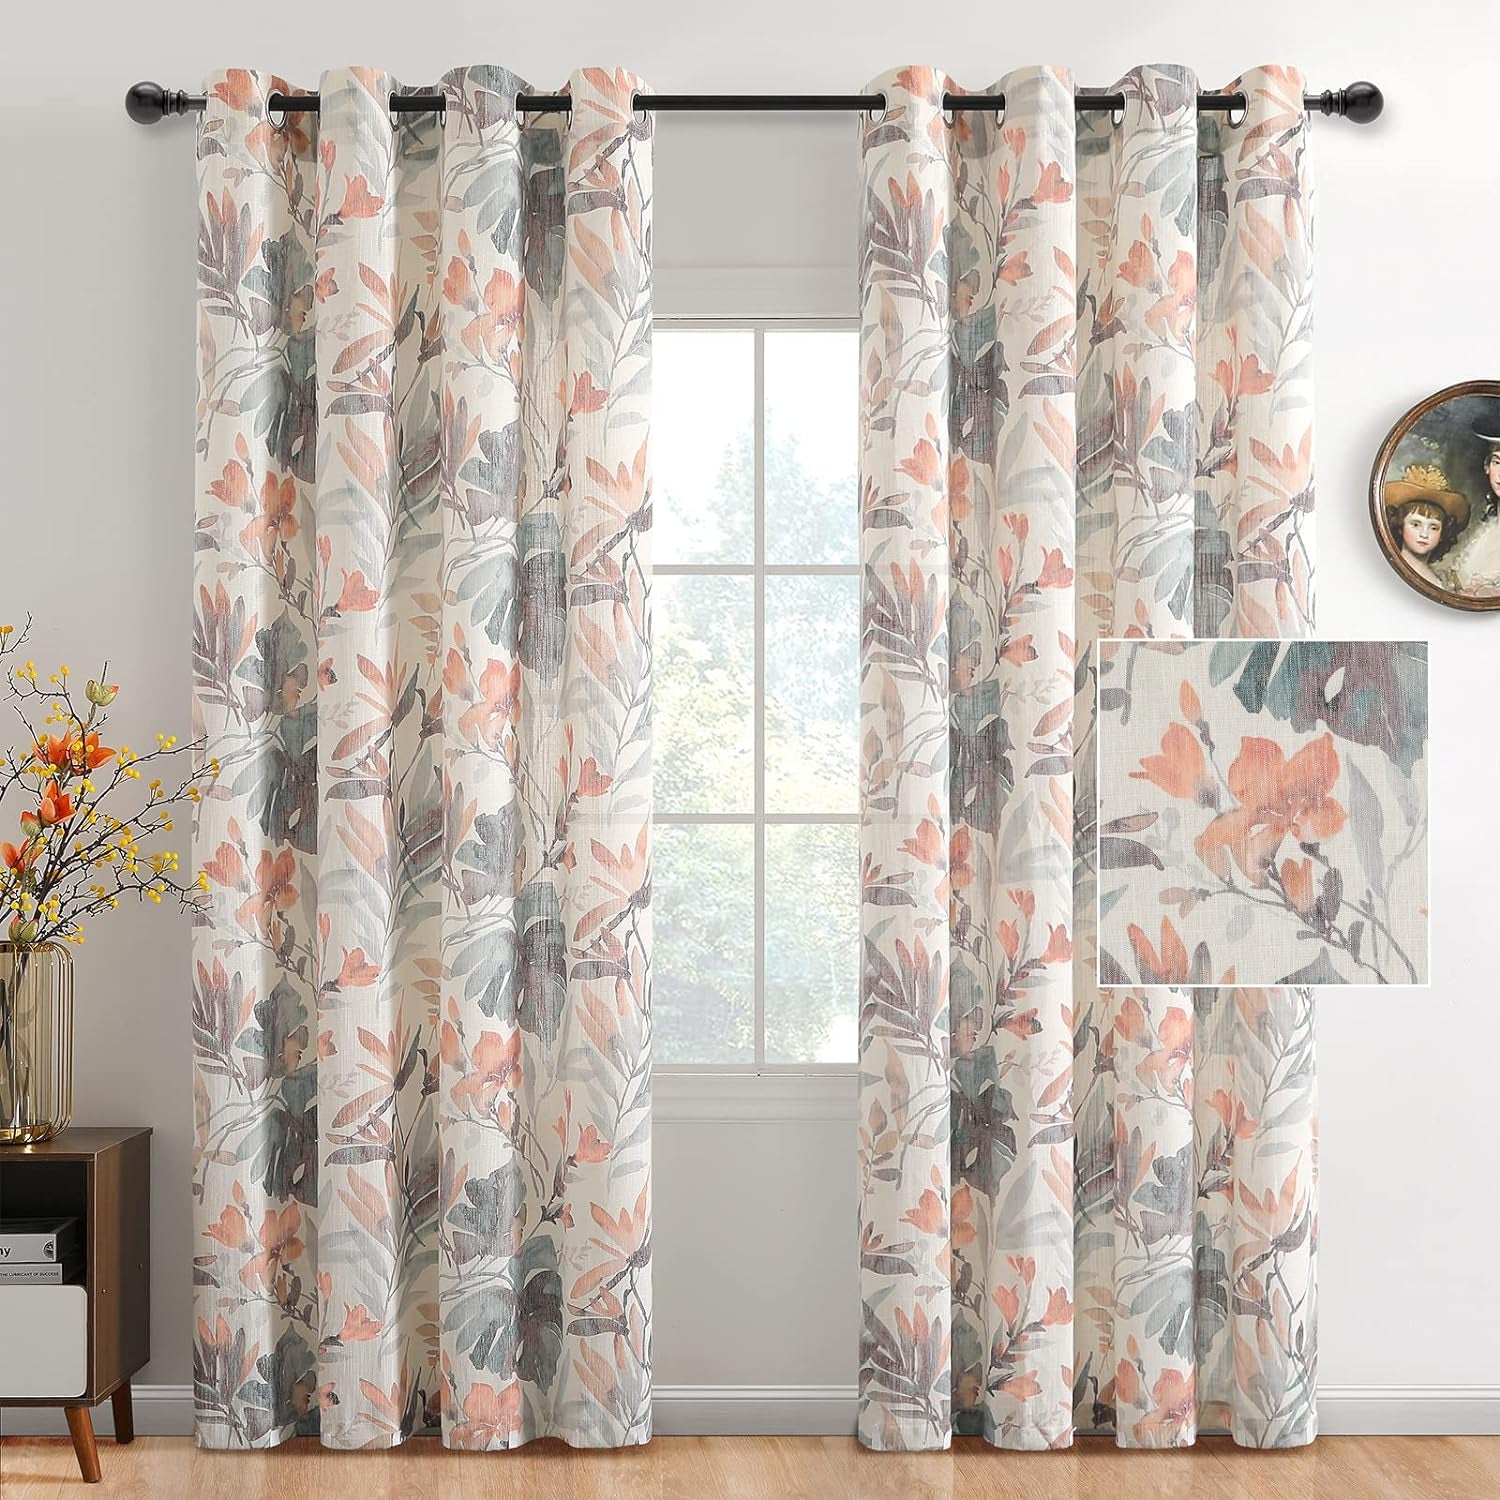 MYSKY HOME Floral Curtains 84 Inches Long Printed Grommet Cotton Curtains for Living Room Bedroom Light Filtering Linen Style Curtain Burlap Effect Drape Window Treatments, 2 Panel Coral and Natural  MYSKY HOME   